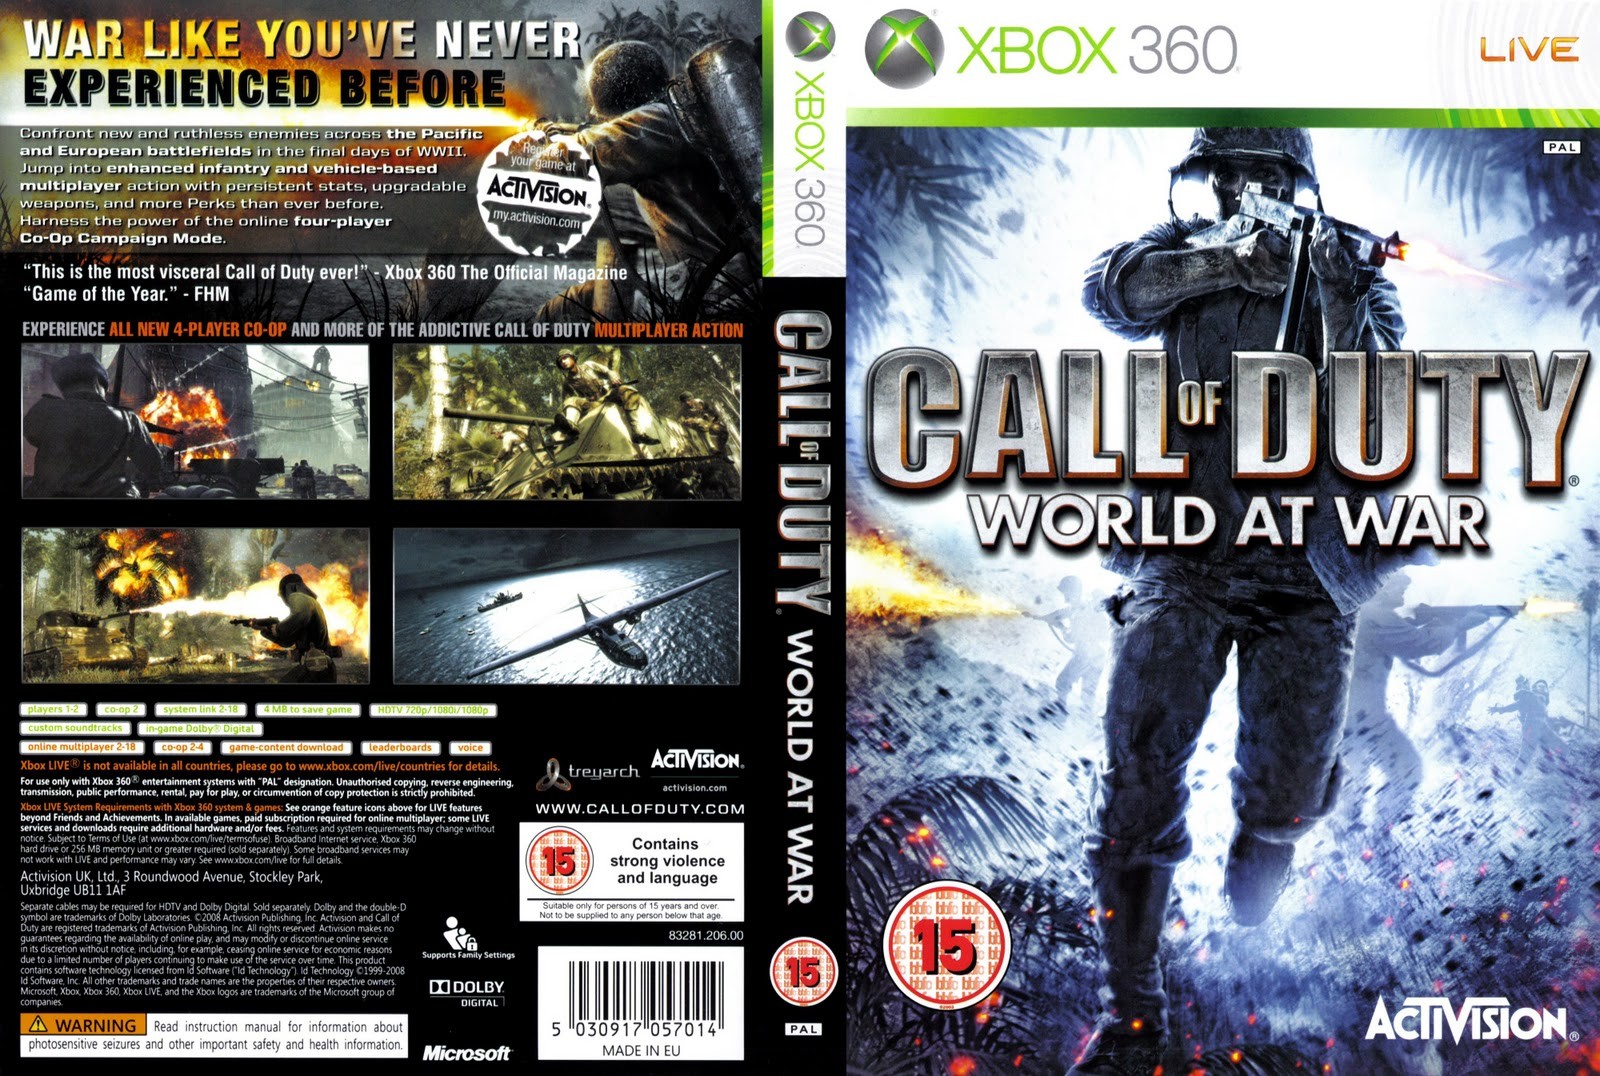 call of duty world war 2 for xbox 360